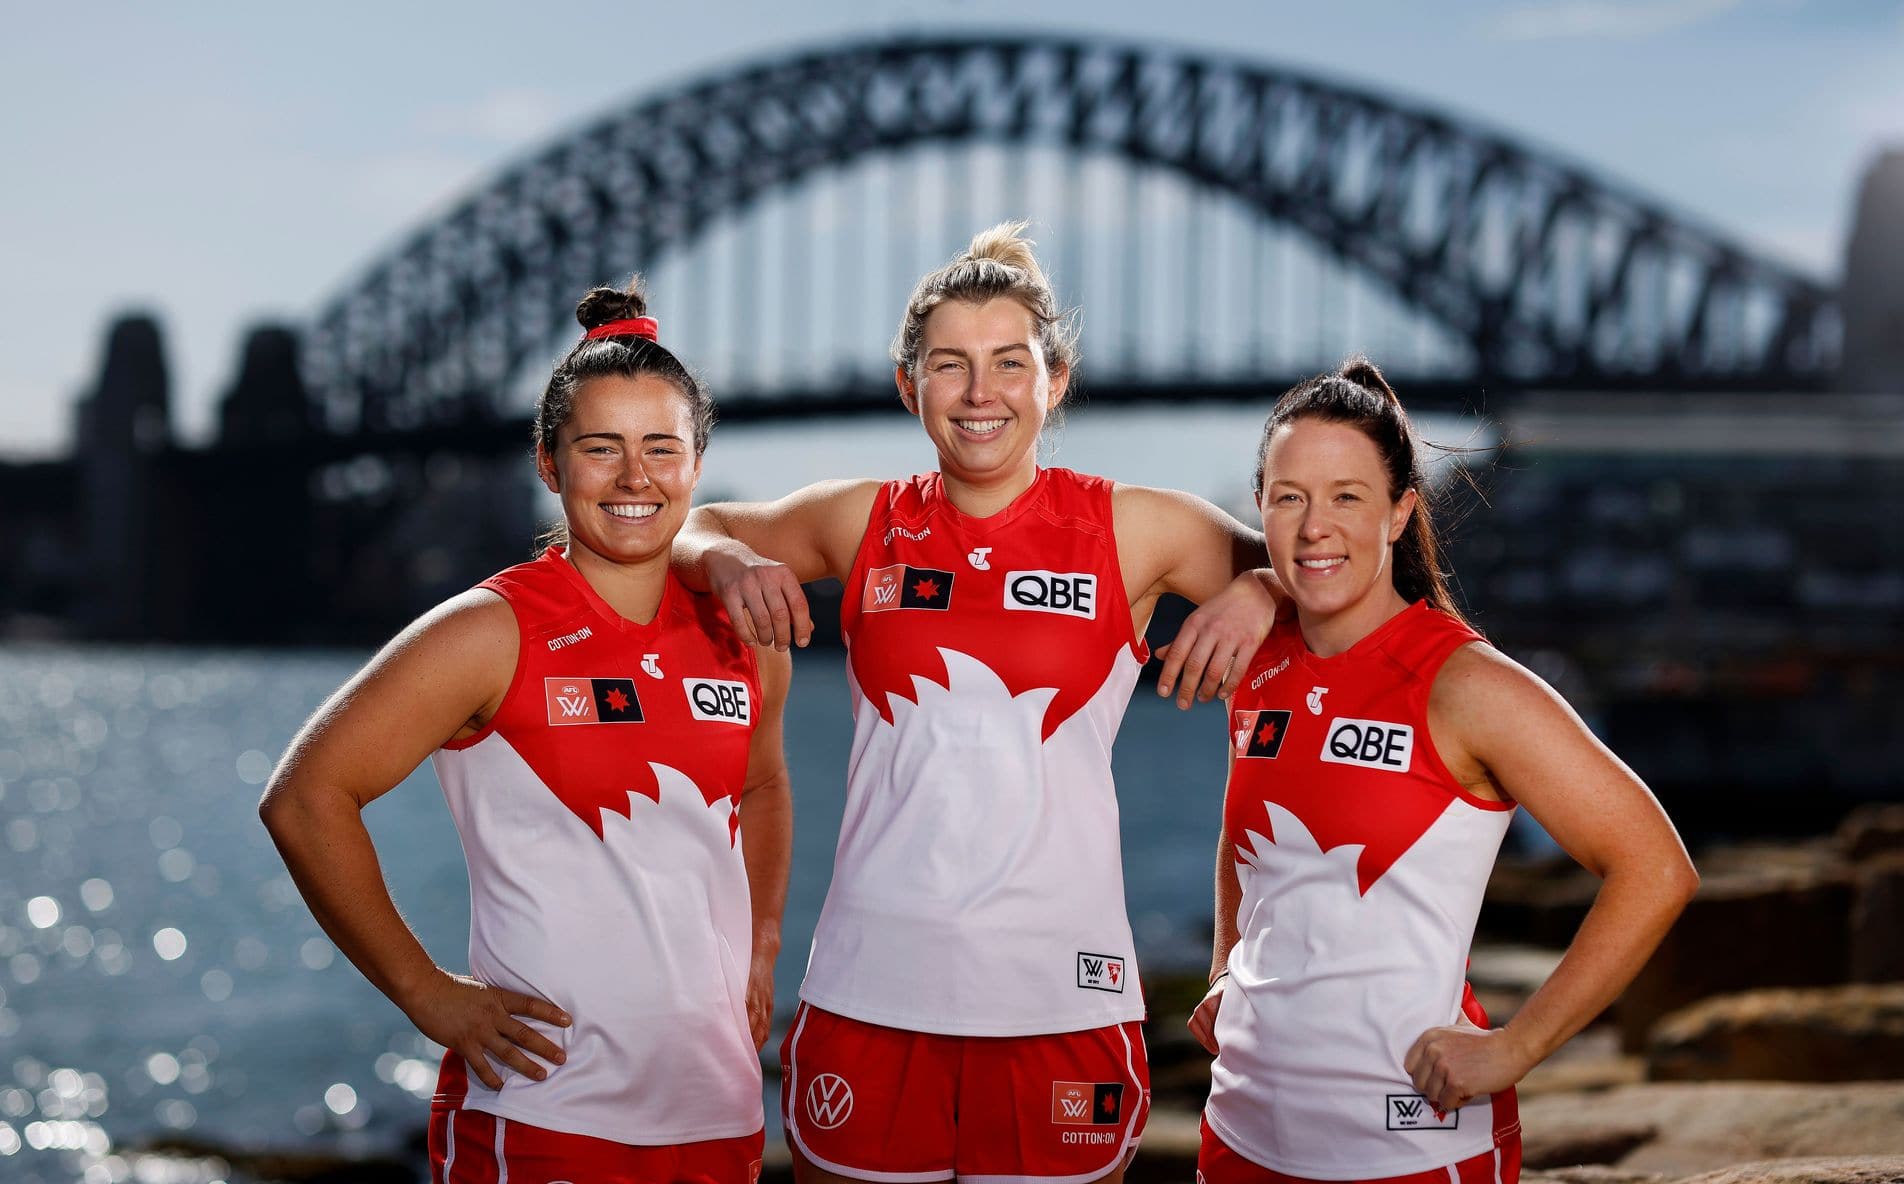 Sydney-Swans-AFLW-captains-Lauren-Szigeti-Maddy-Collier-and-Brooke-Lochland-Photo-by-Phil-Hillyard.jpg